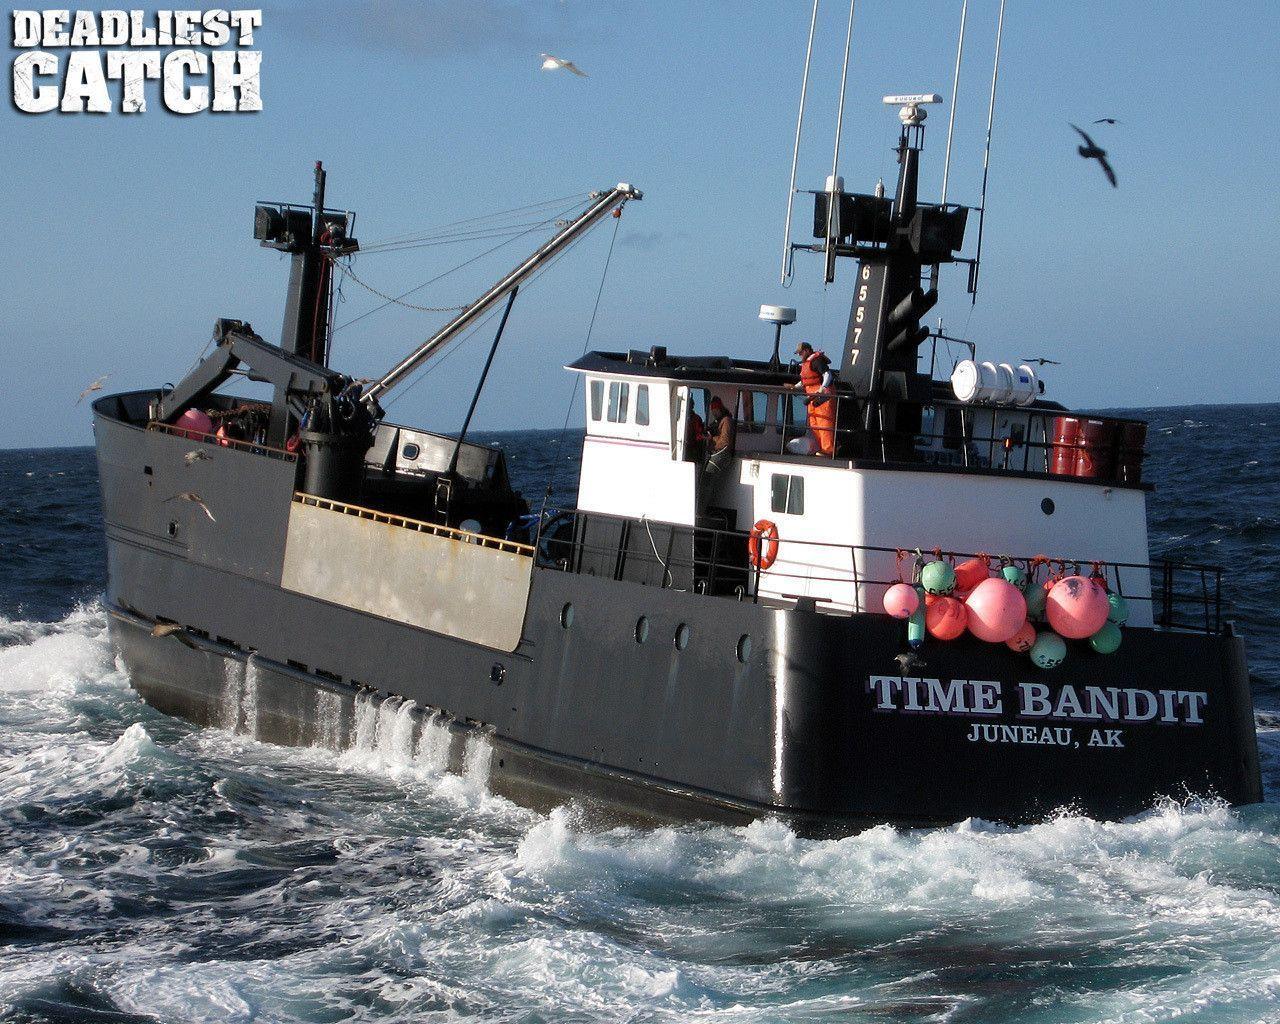 Deadliest Catch image Time Bandit HD wallpaper and background